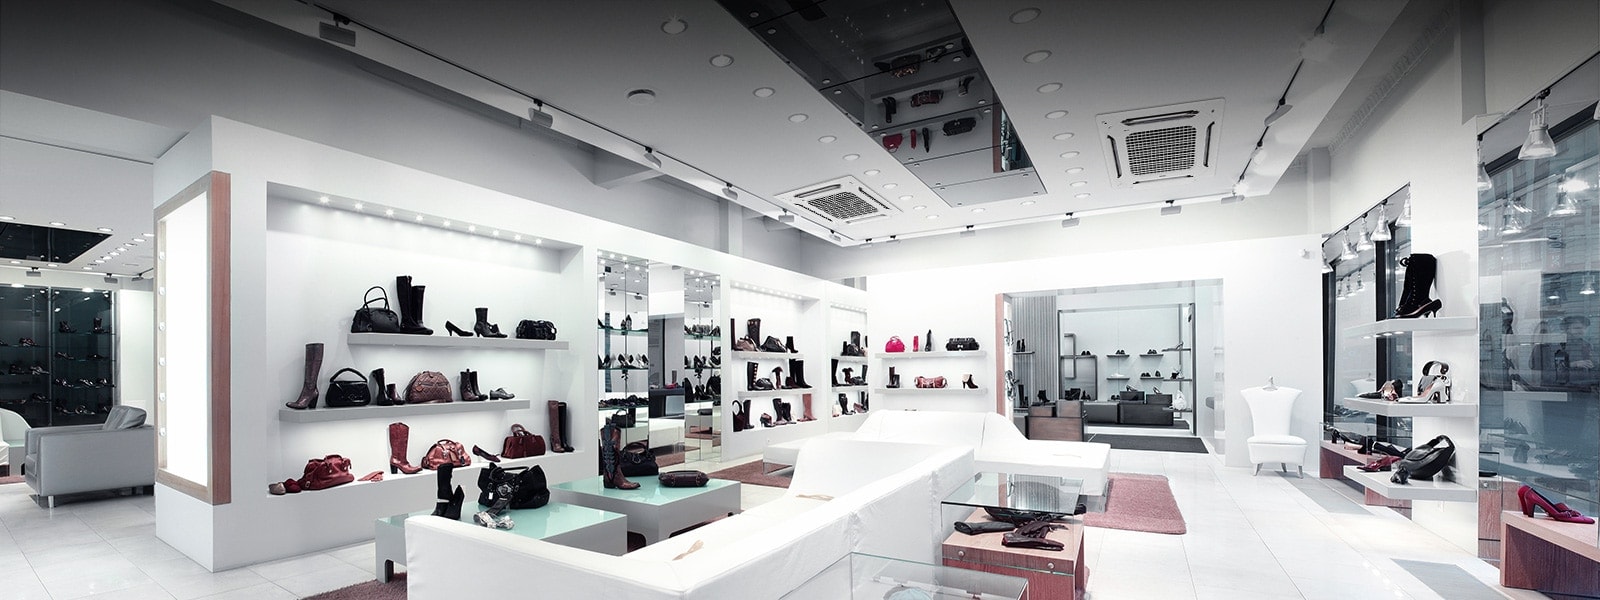 Two LG Multi V indoor units are installed in a modern, upscale retail store for air conditioning, ensuring a comfortable shopping environment. The retail store features white walls and sleek shelving displaying various handbags and shoes.